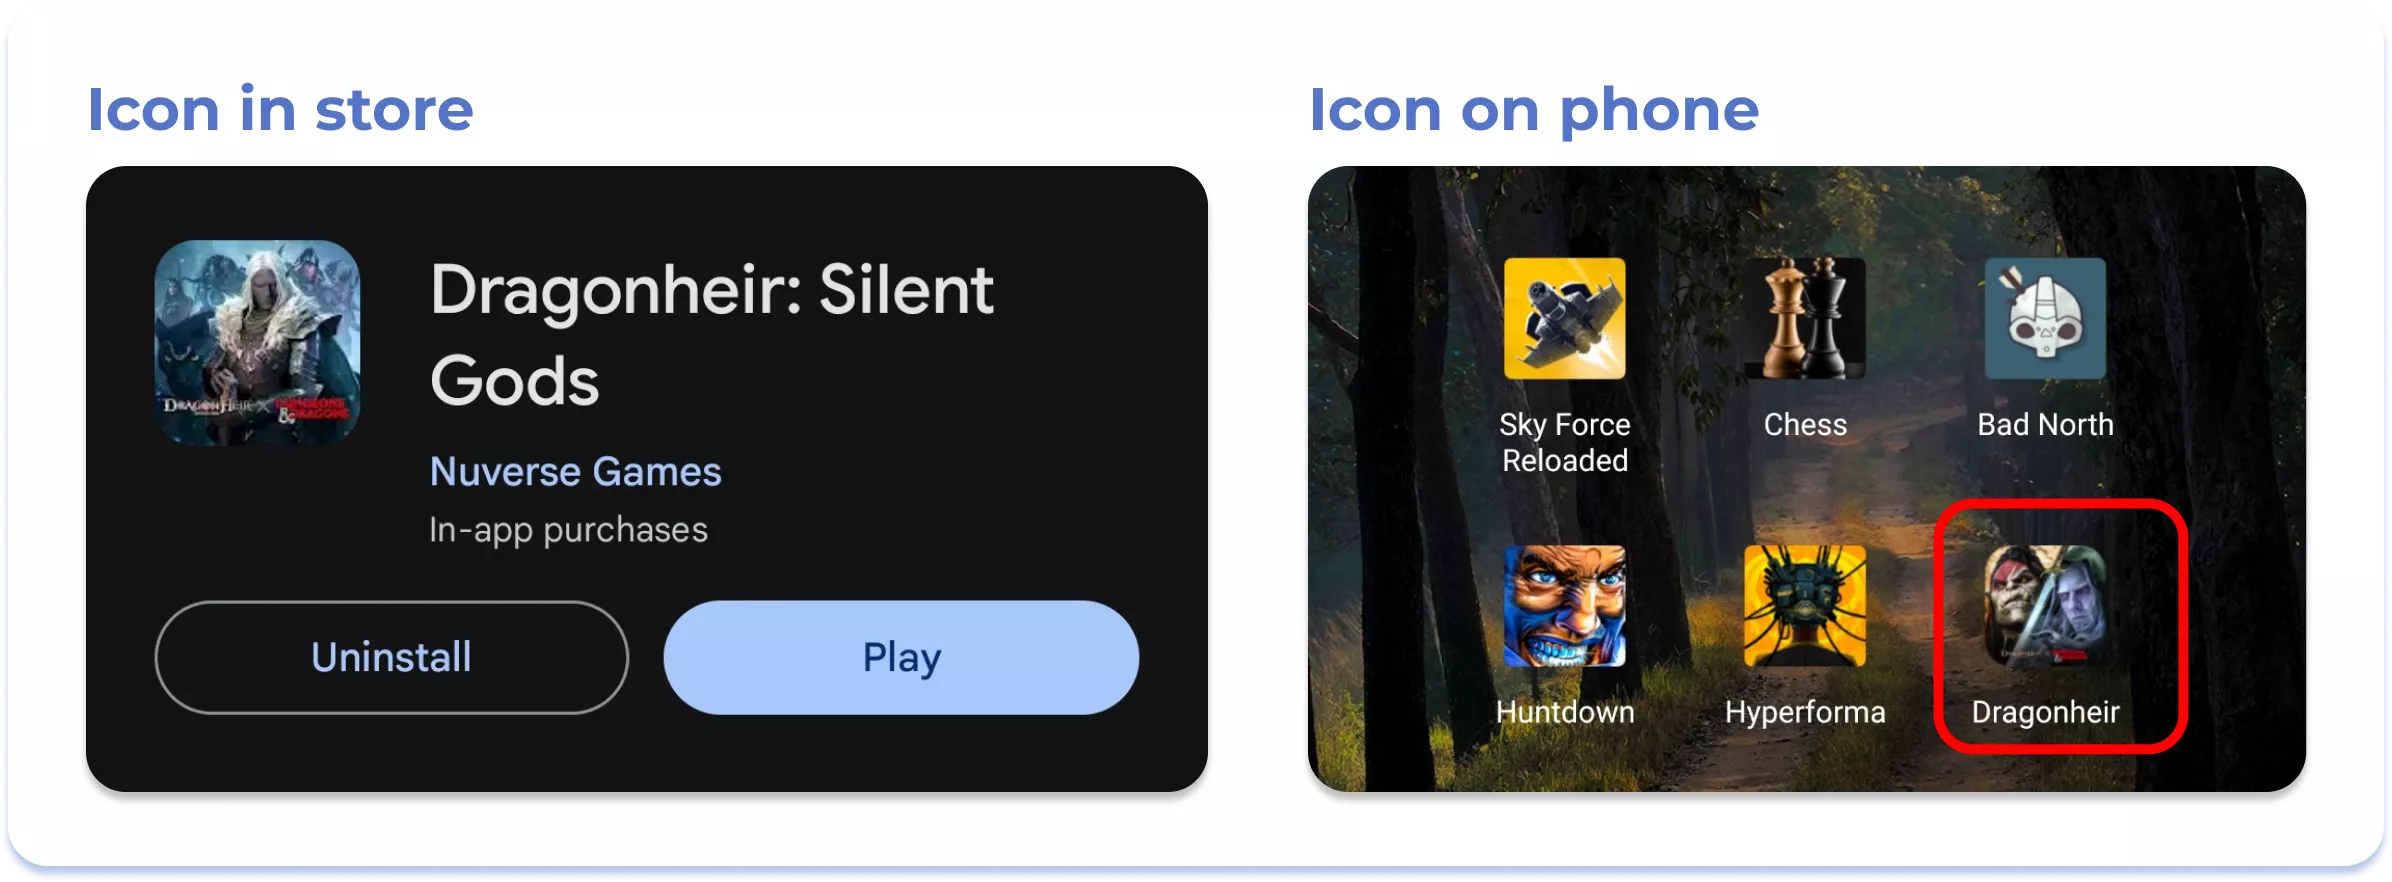 Different icons